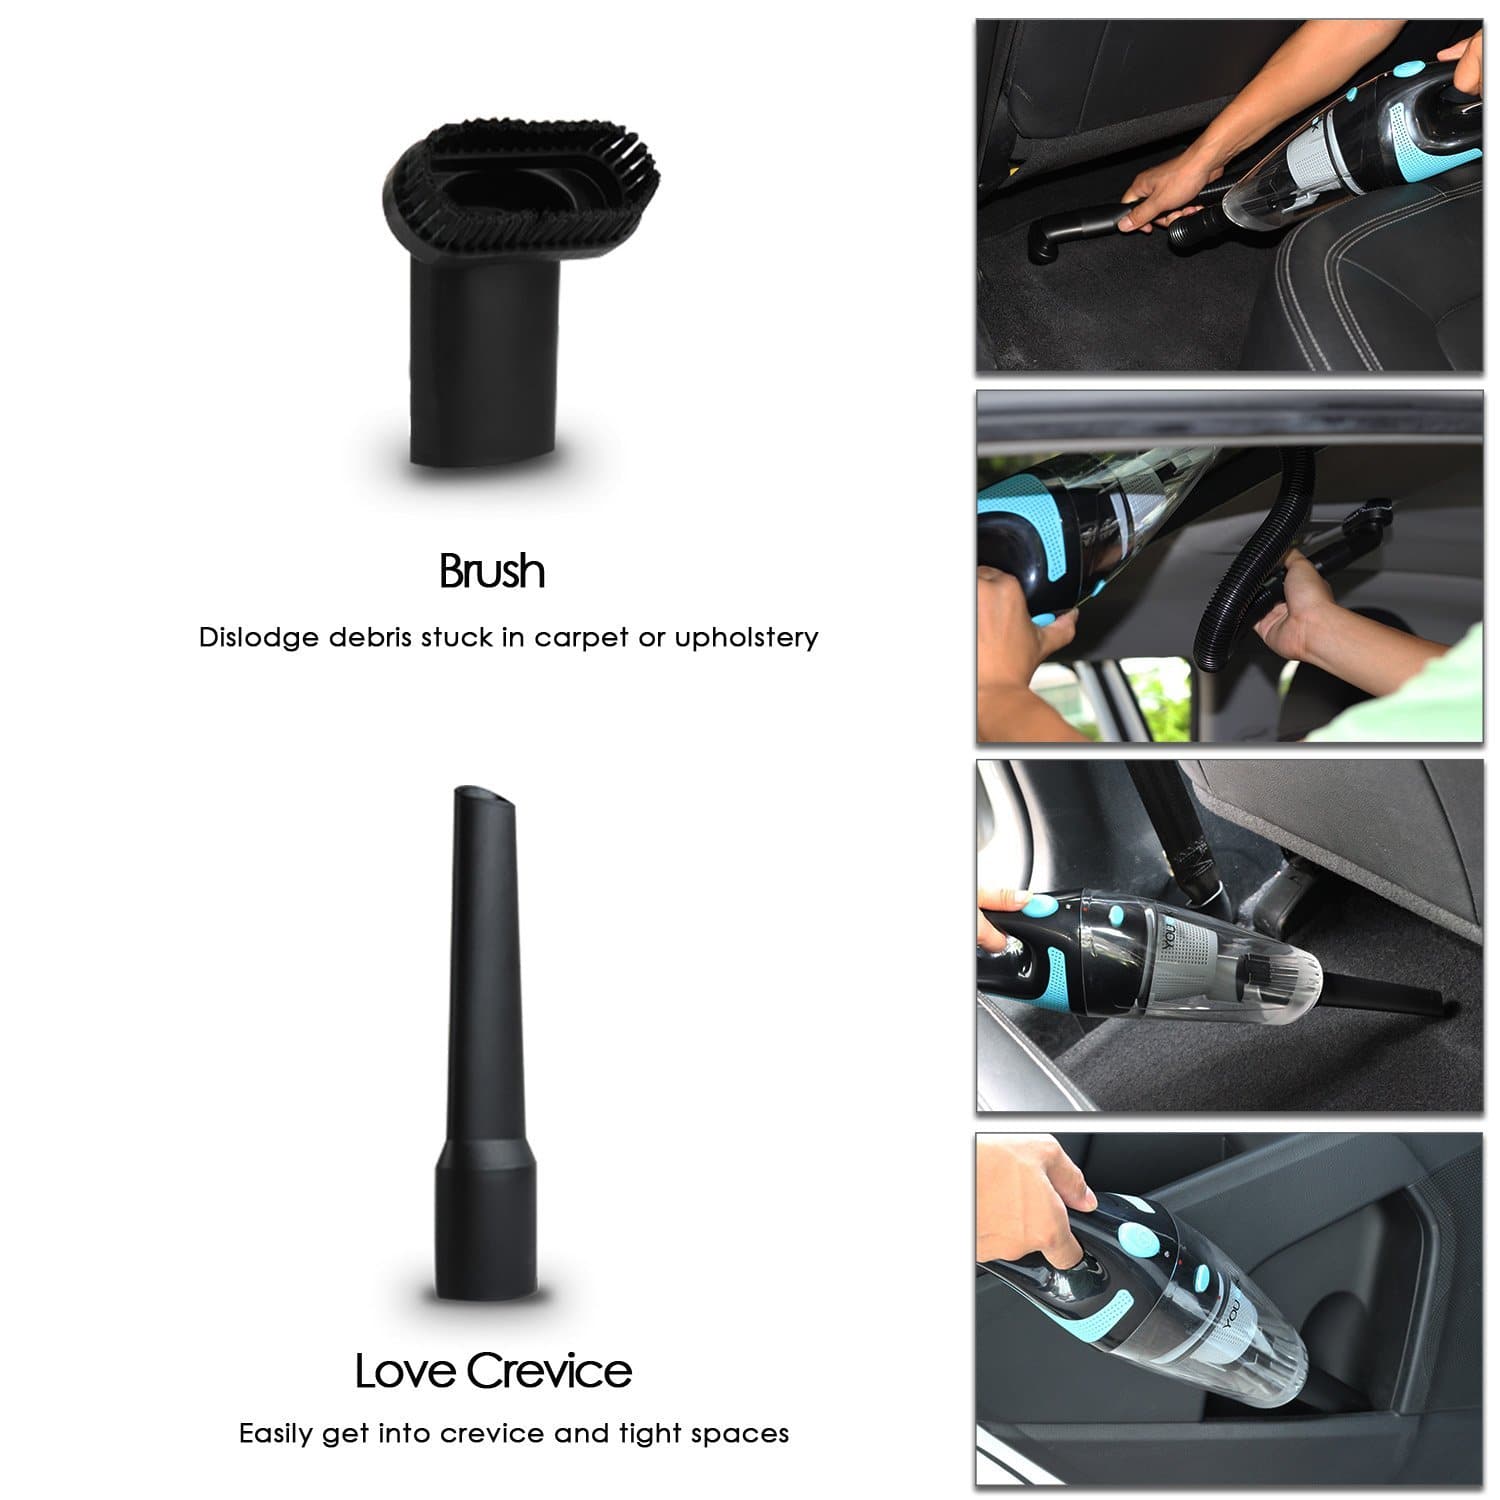 younick car vacuum cleaner